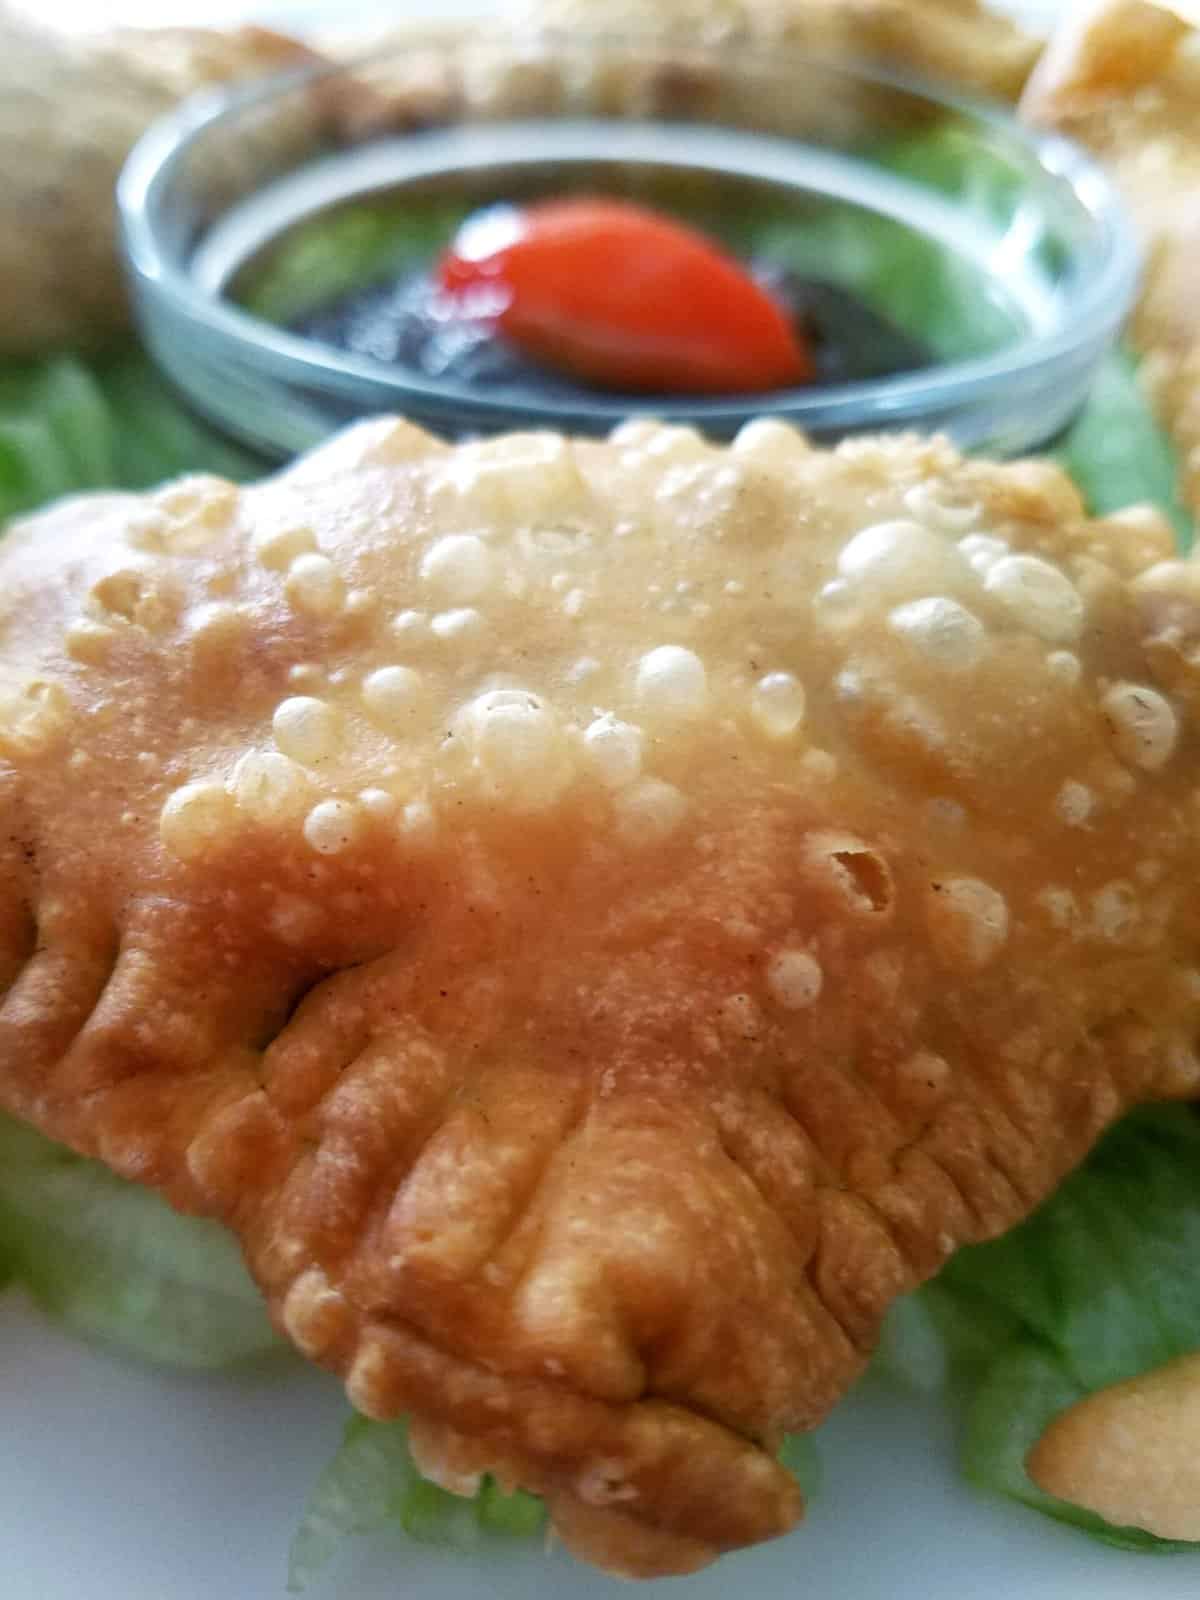  A warm and crispy samosa is the perfect snack for any time of the day!